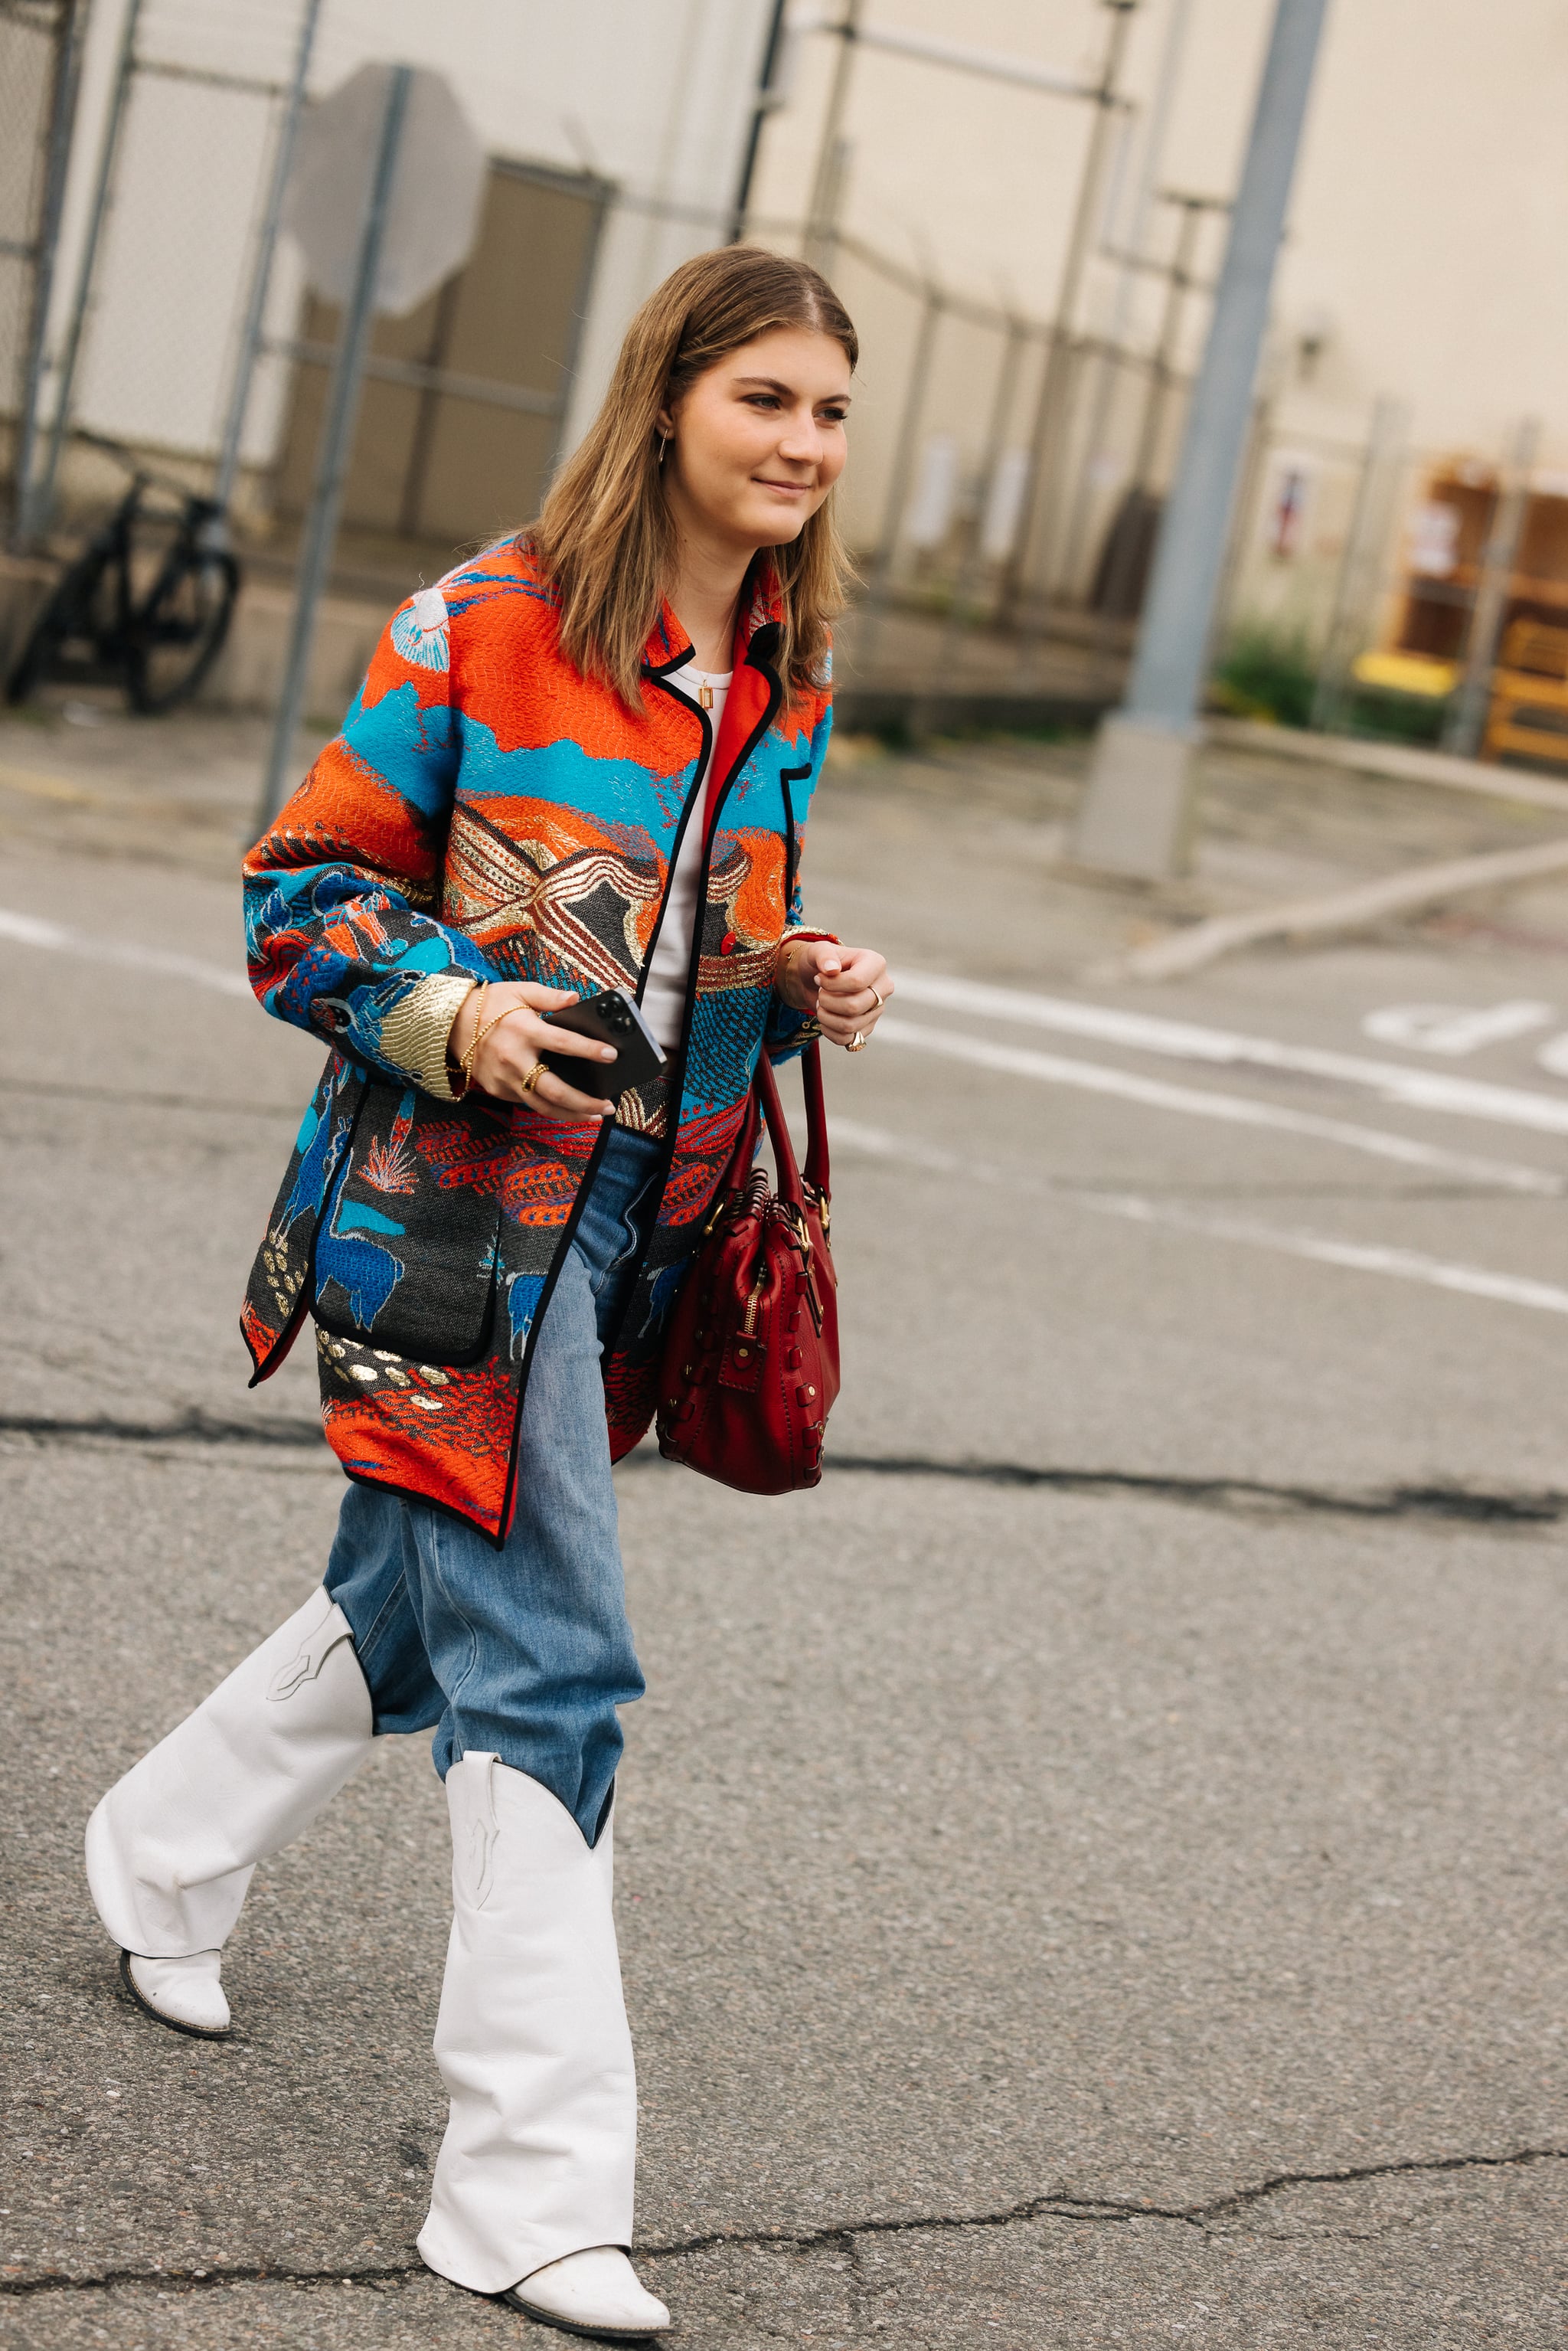 The Best Bags of NYFW Spring 2016 Street Style – Days 7 & 8 - Page